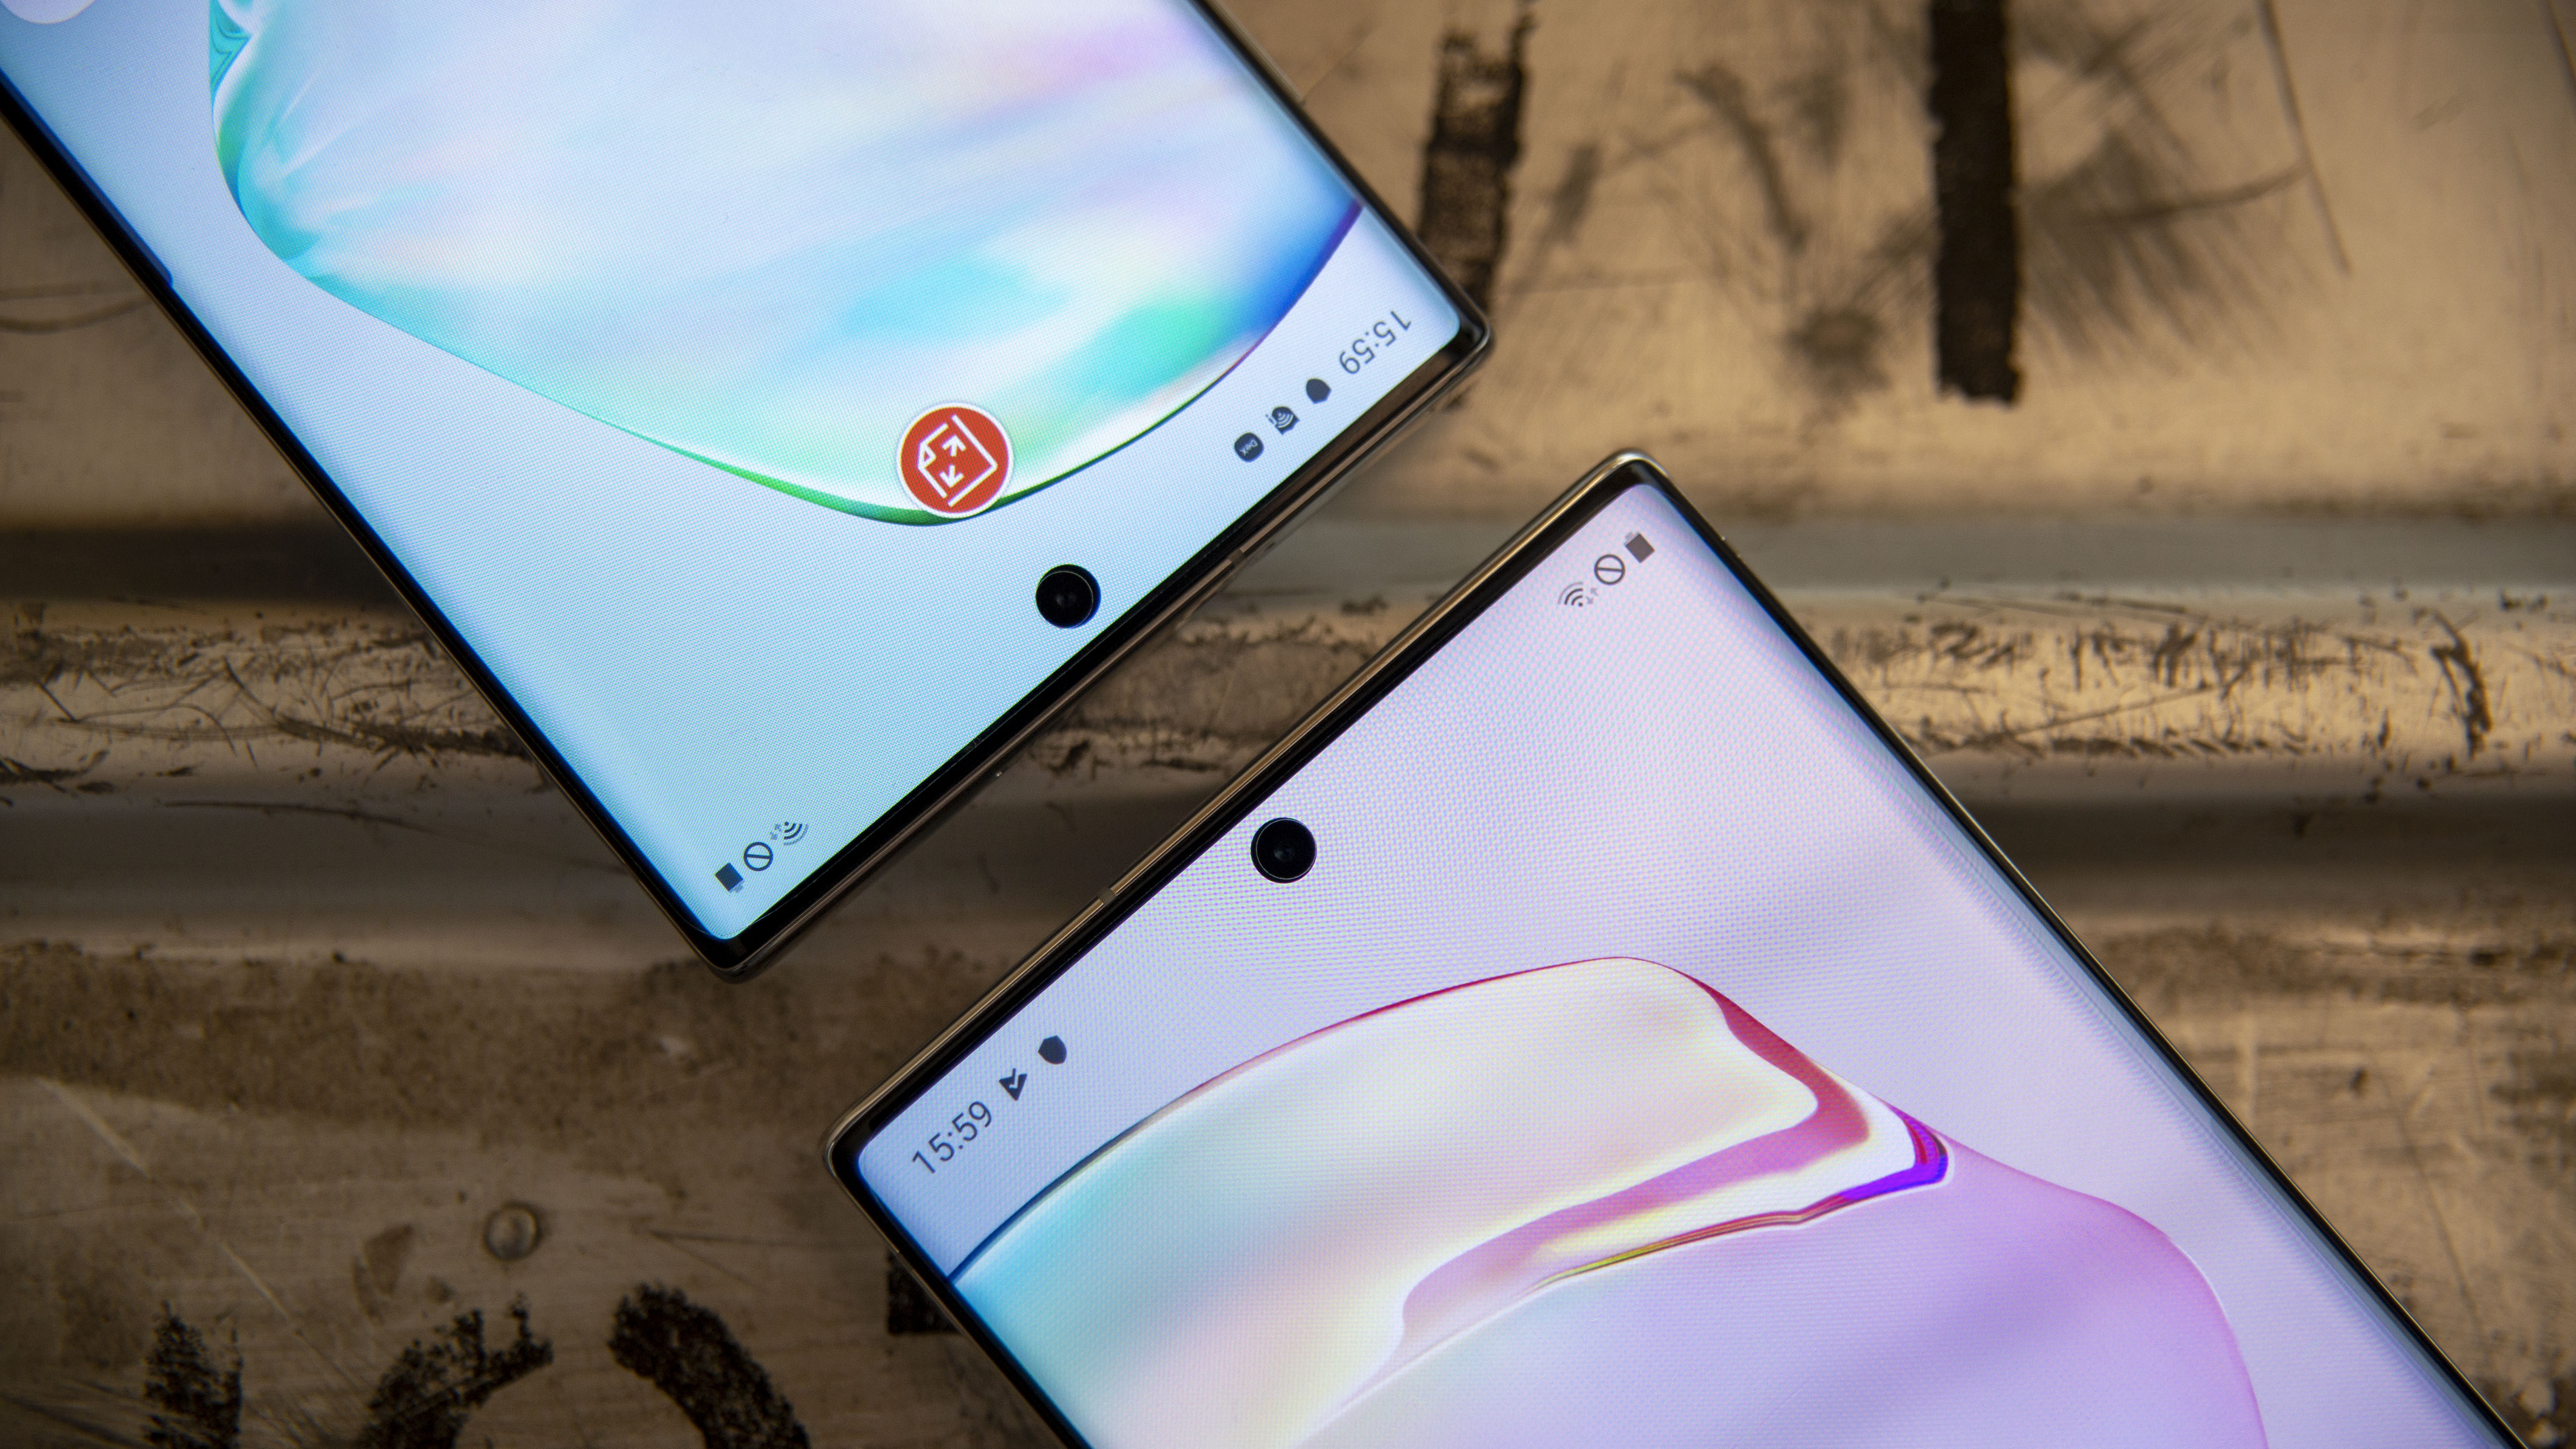 The Galaxy Note 10 Plus (Pro) Model - Hands-On! 